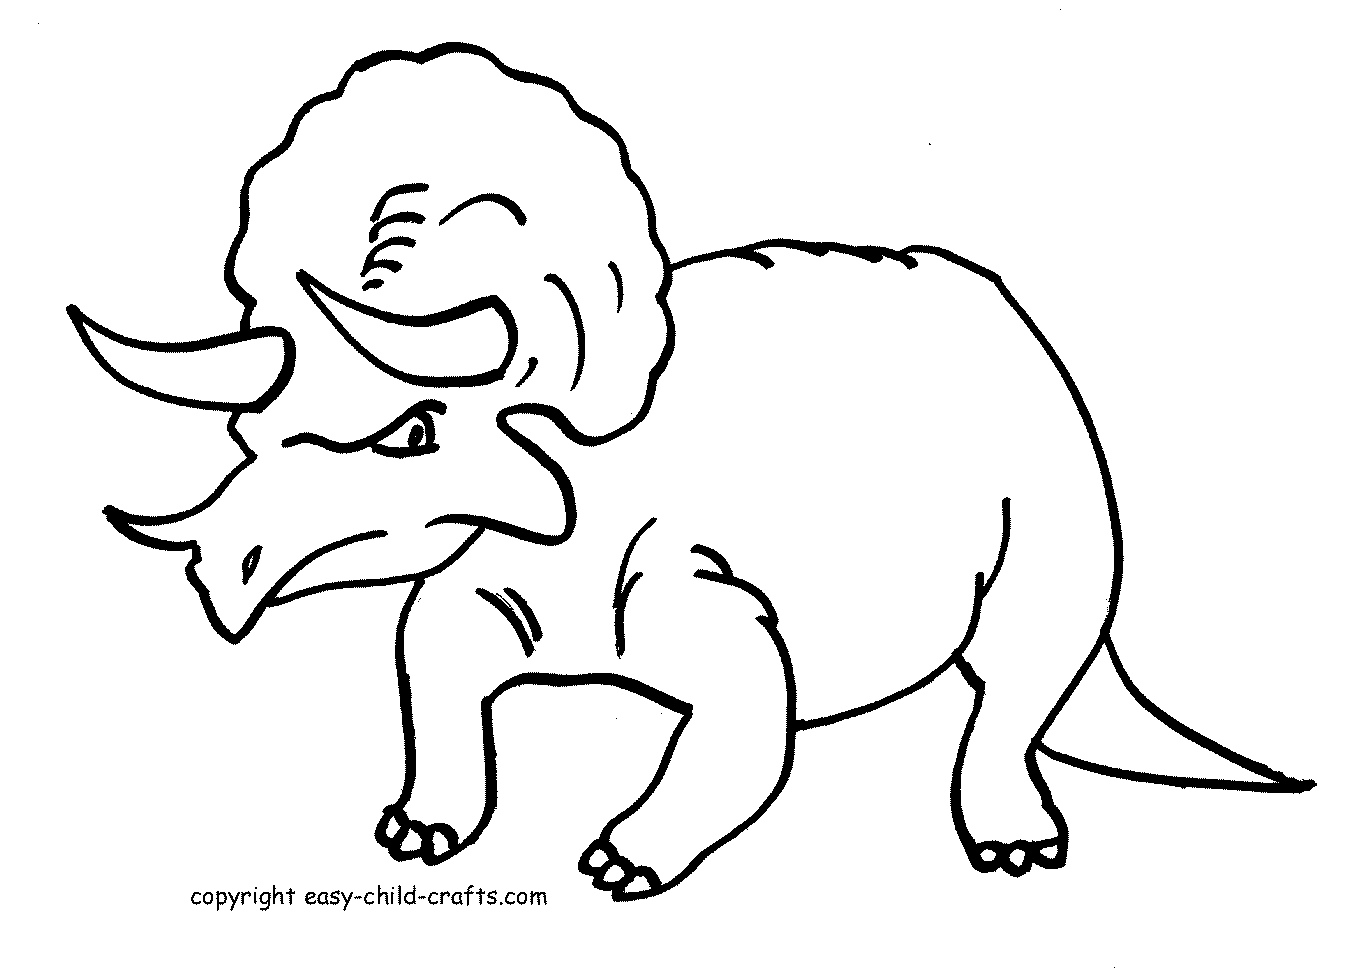 Coloring page: Dinosaur (Animals) #5499 - Printable coloring pages